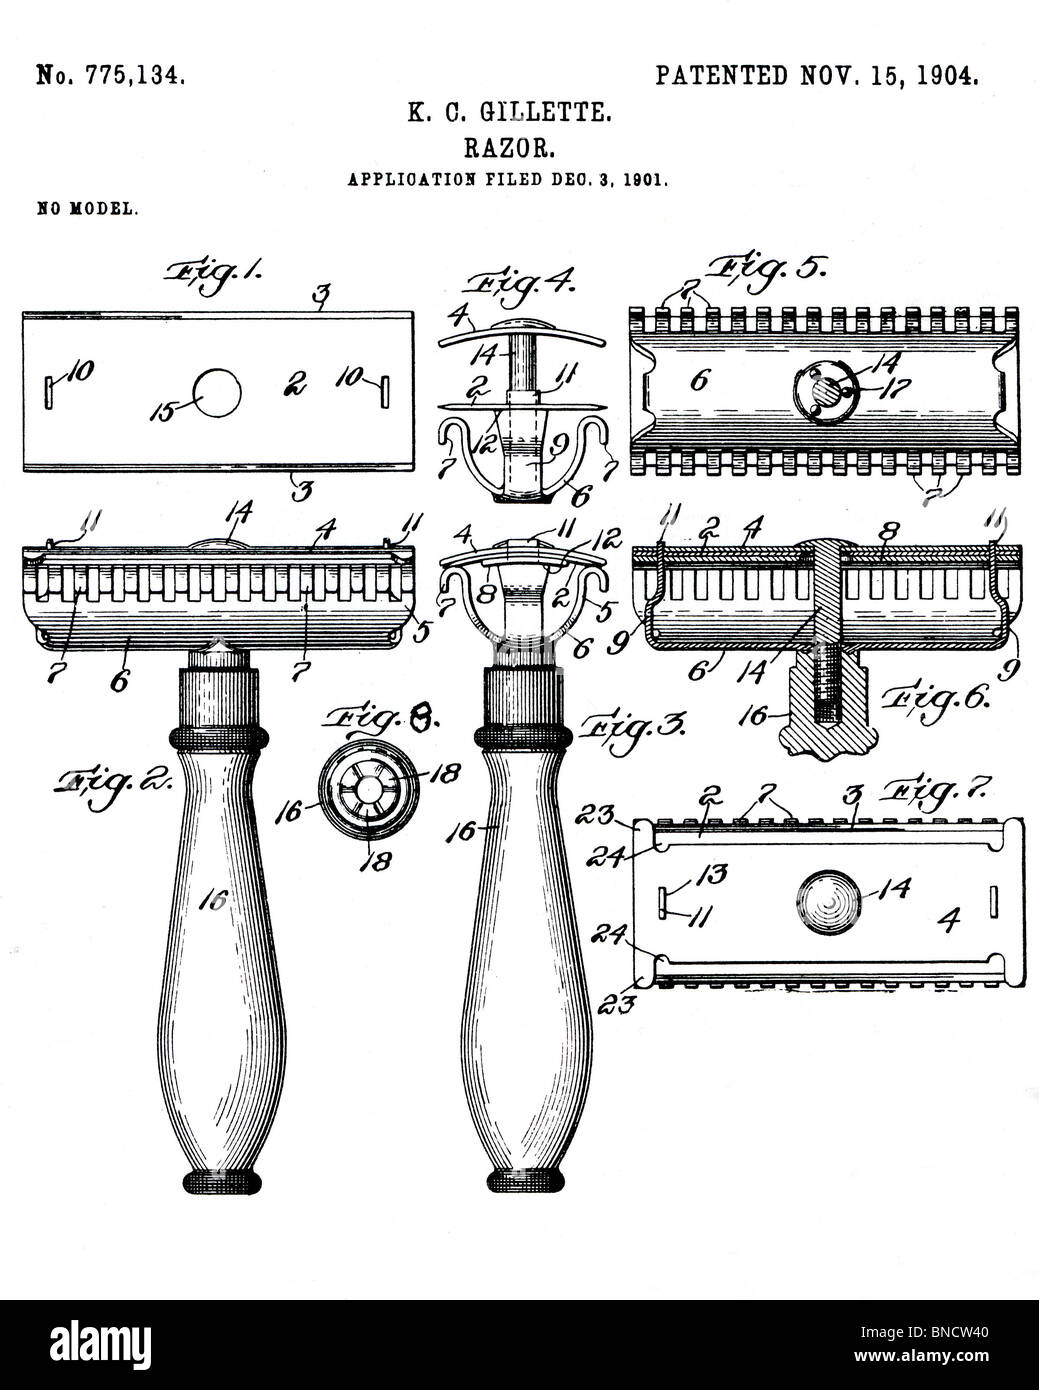 GILLETTE SAFETY RAZOR PATENT from 1904 Stock Photo - Alamy